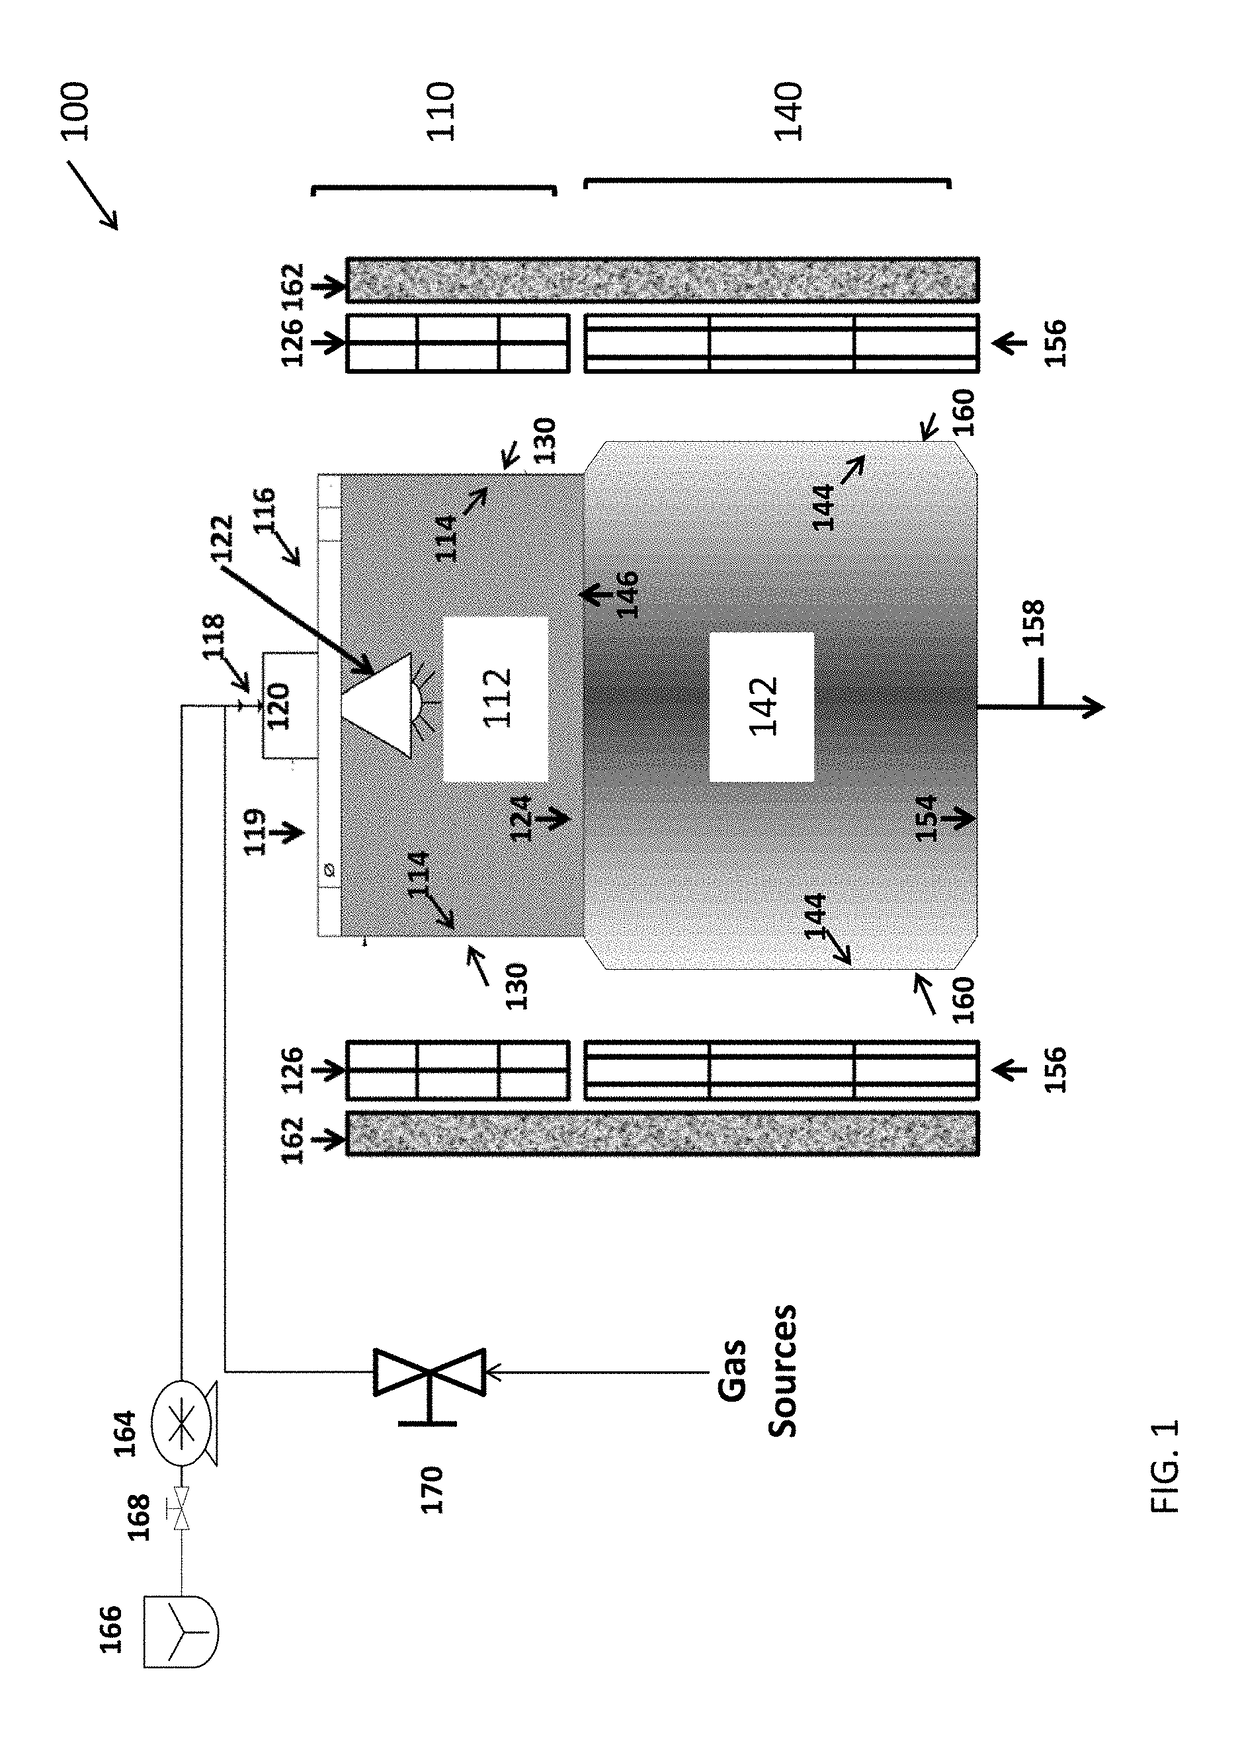 Chemical vapor deposition reactor with preheating, reaction, and cooling zones